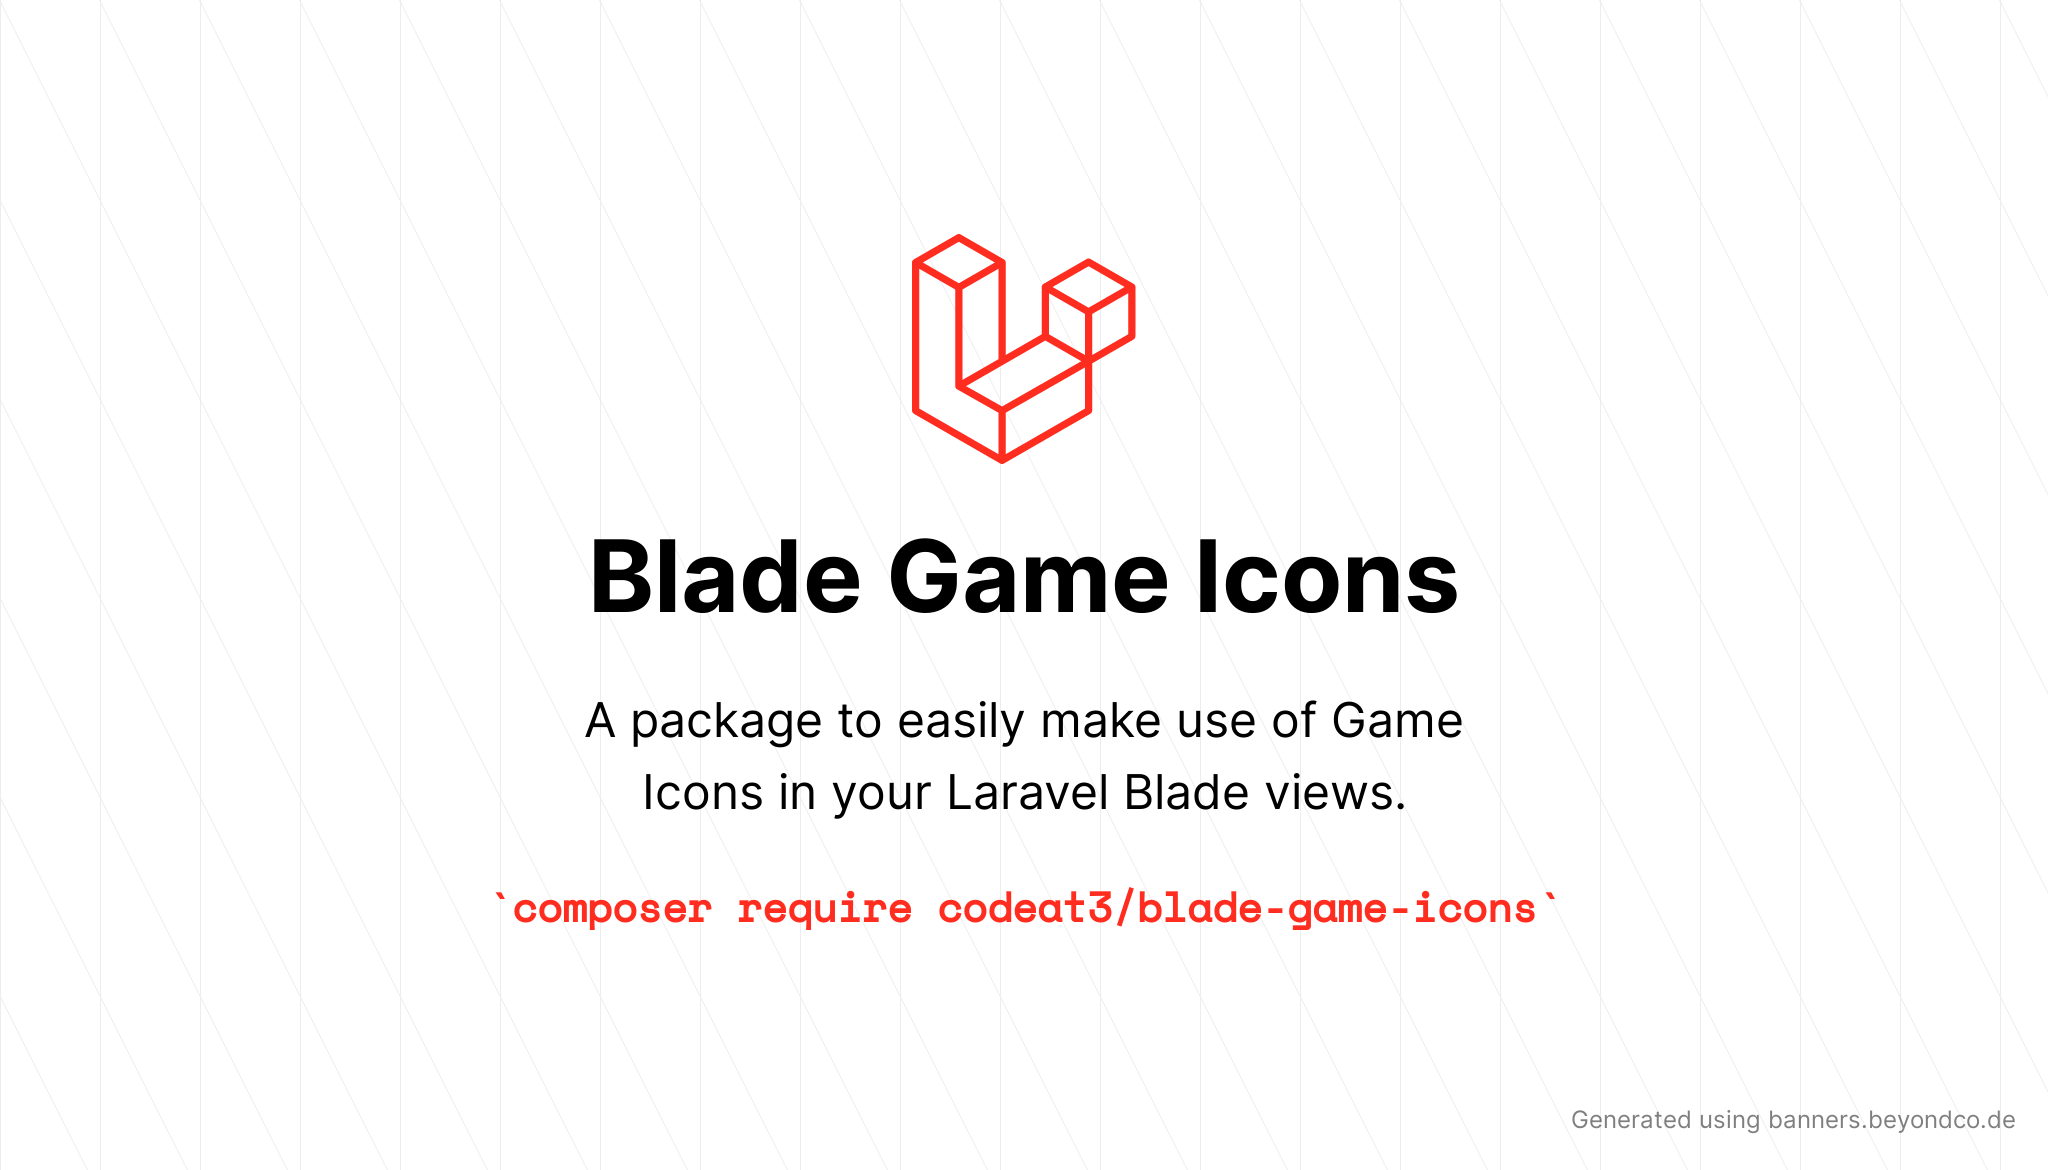 socialcard-blade-game-icons.png